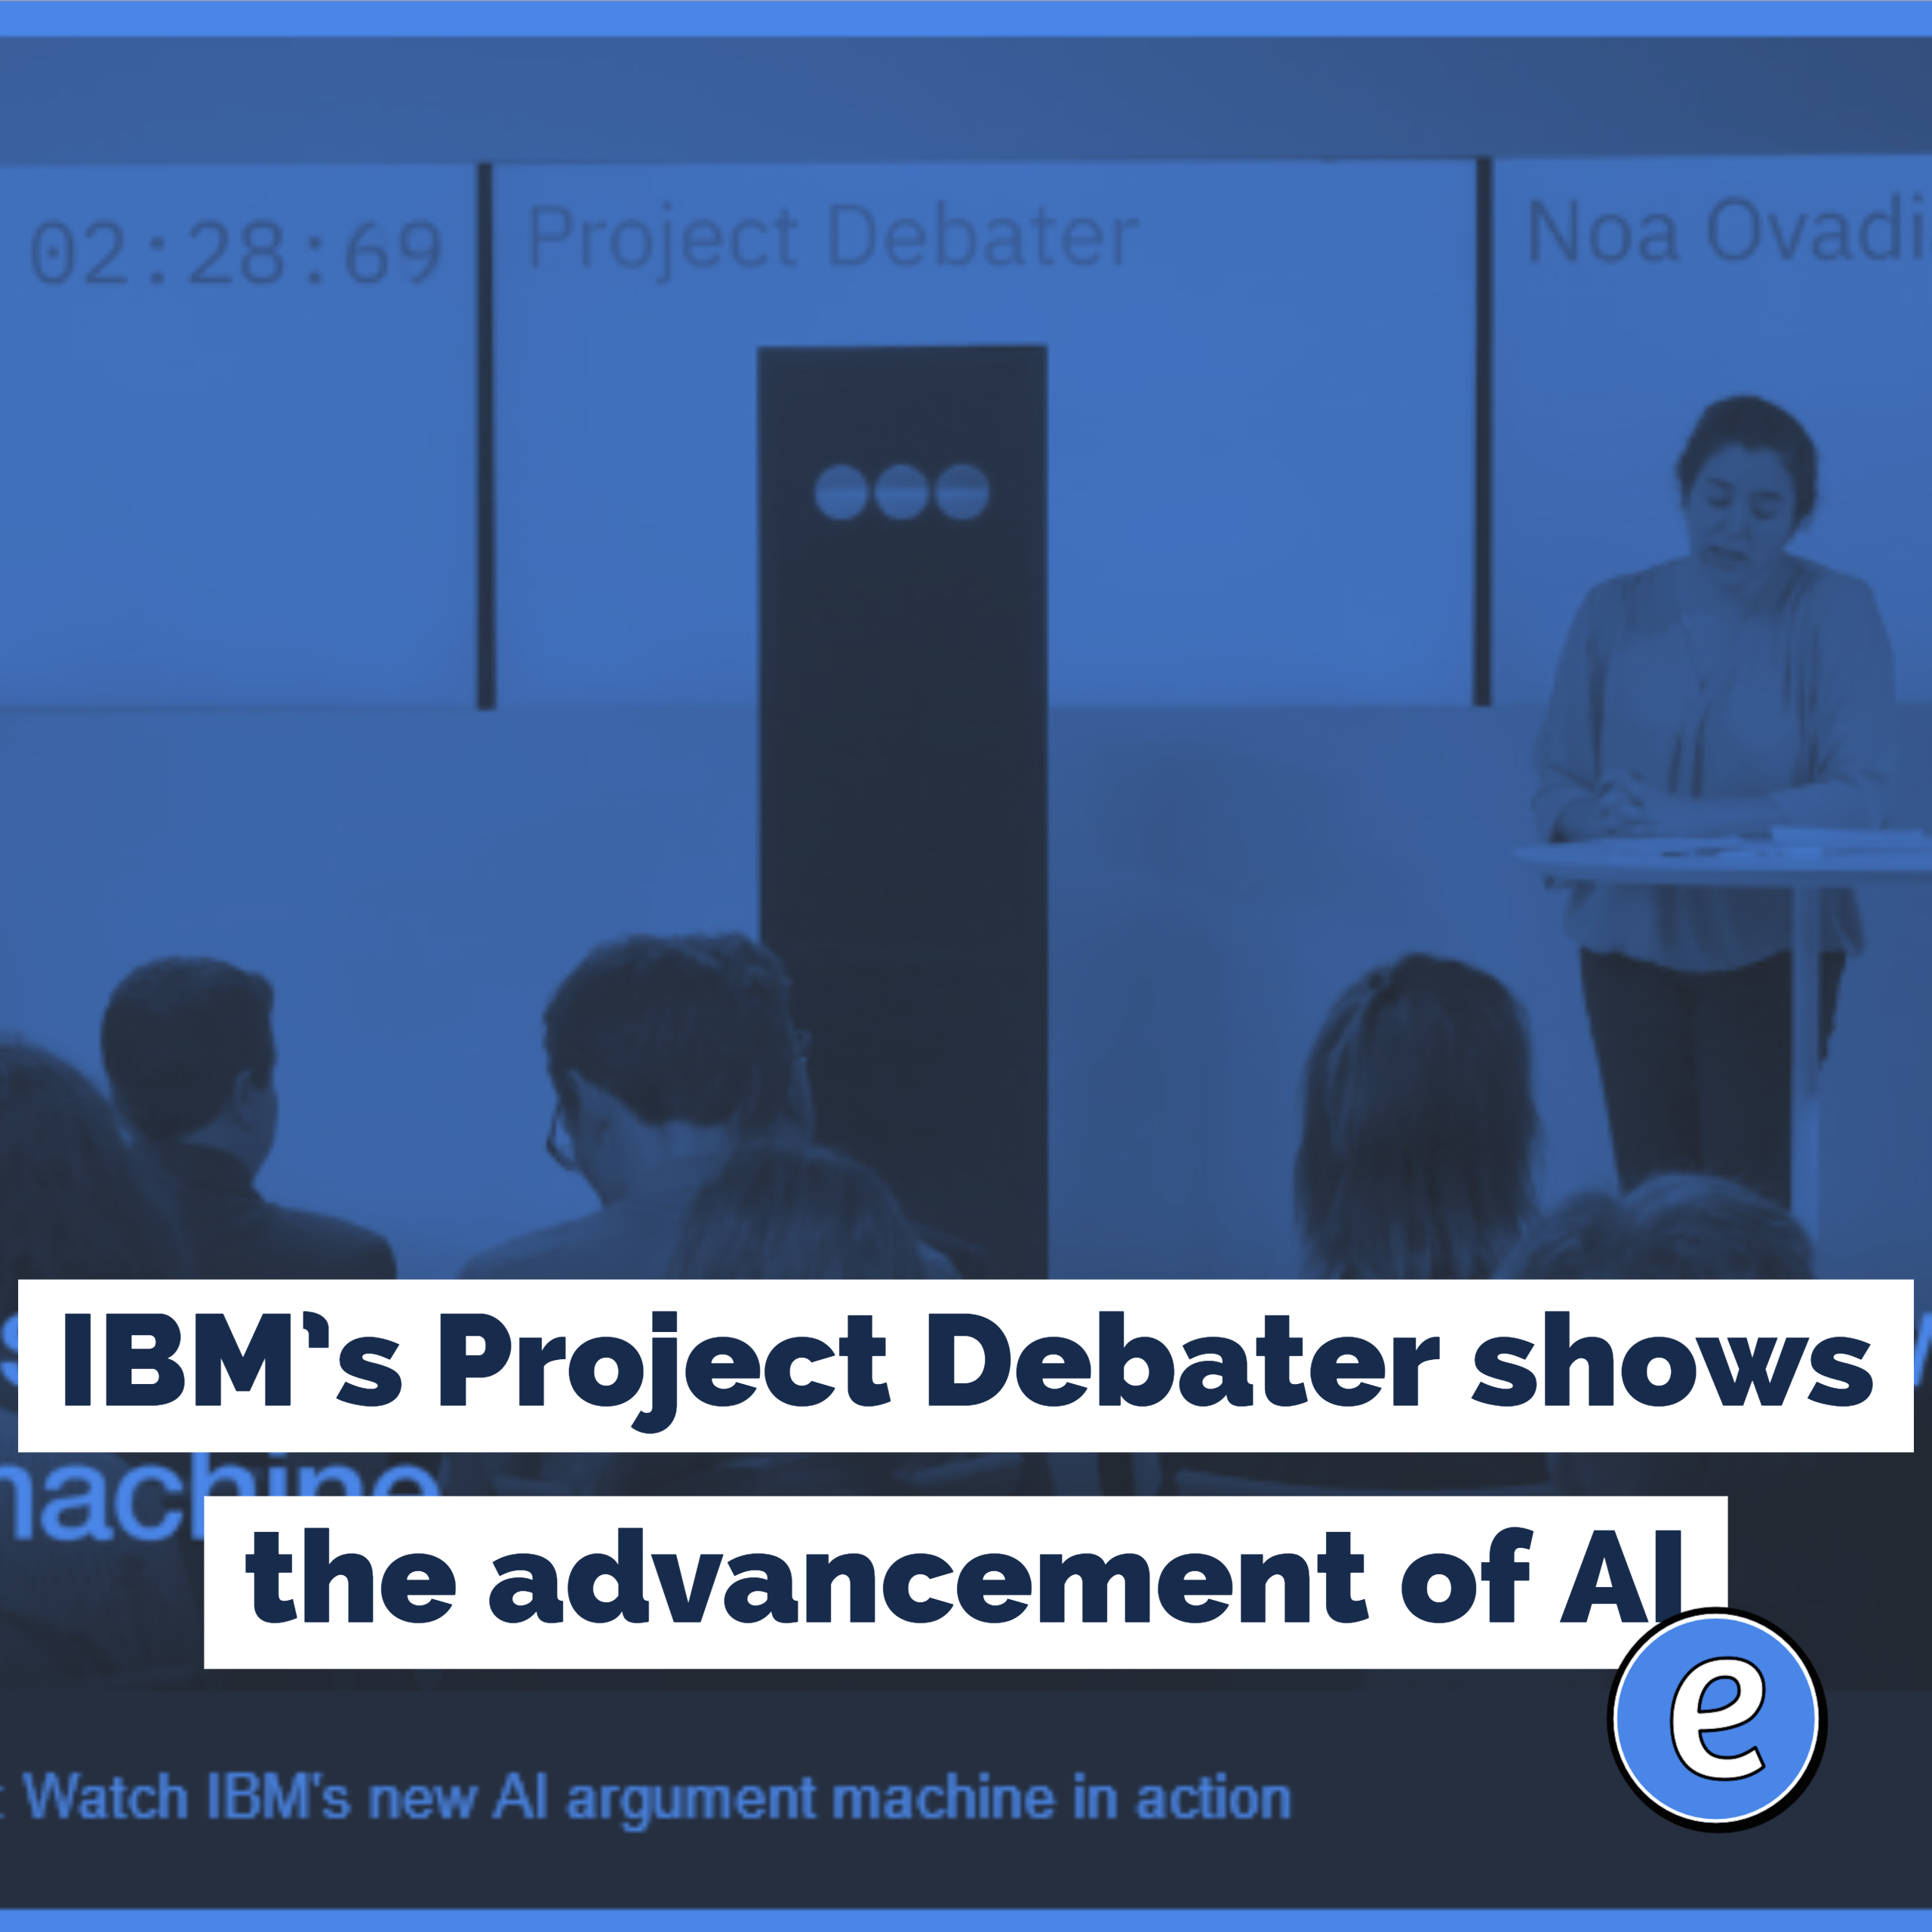 IBM’s Project Debater shows the advancement of AI